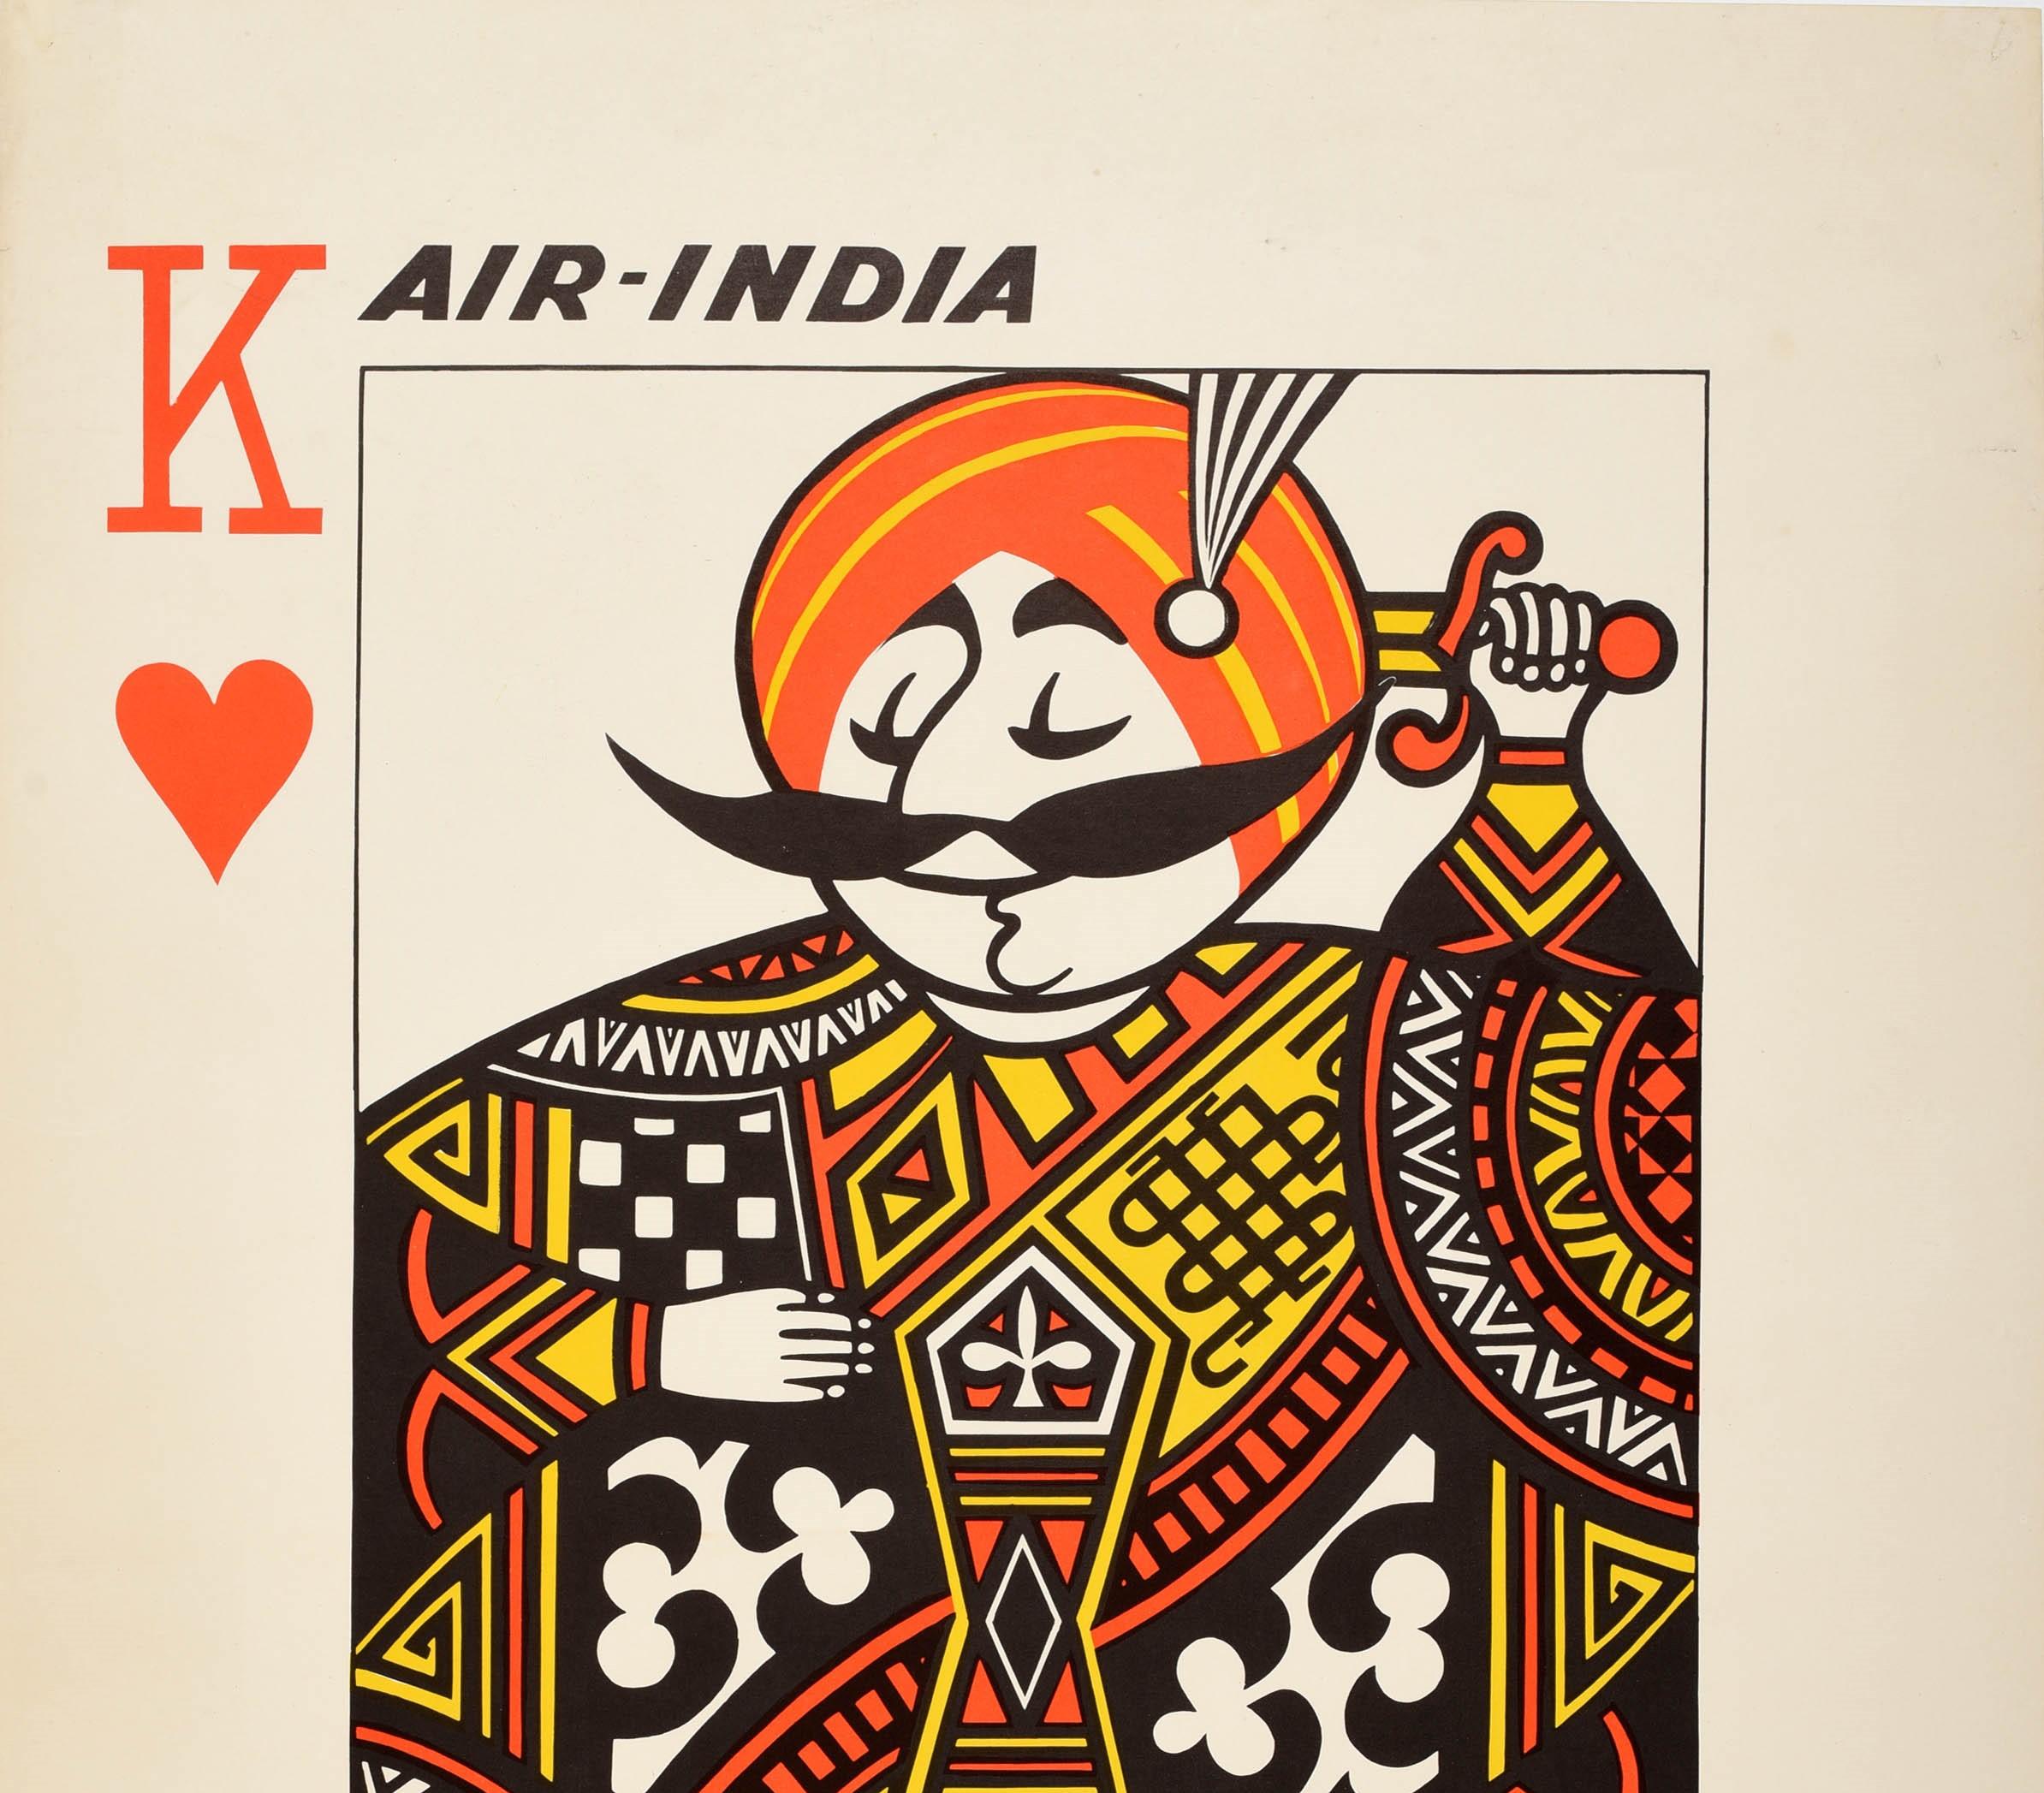 Original Vintage Poster Air India Maharajah King Of Hearts Playing Card Design - Print by Unknown